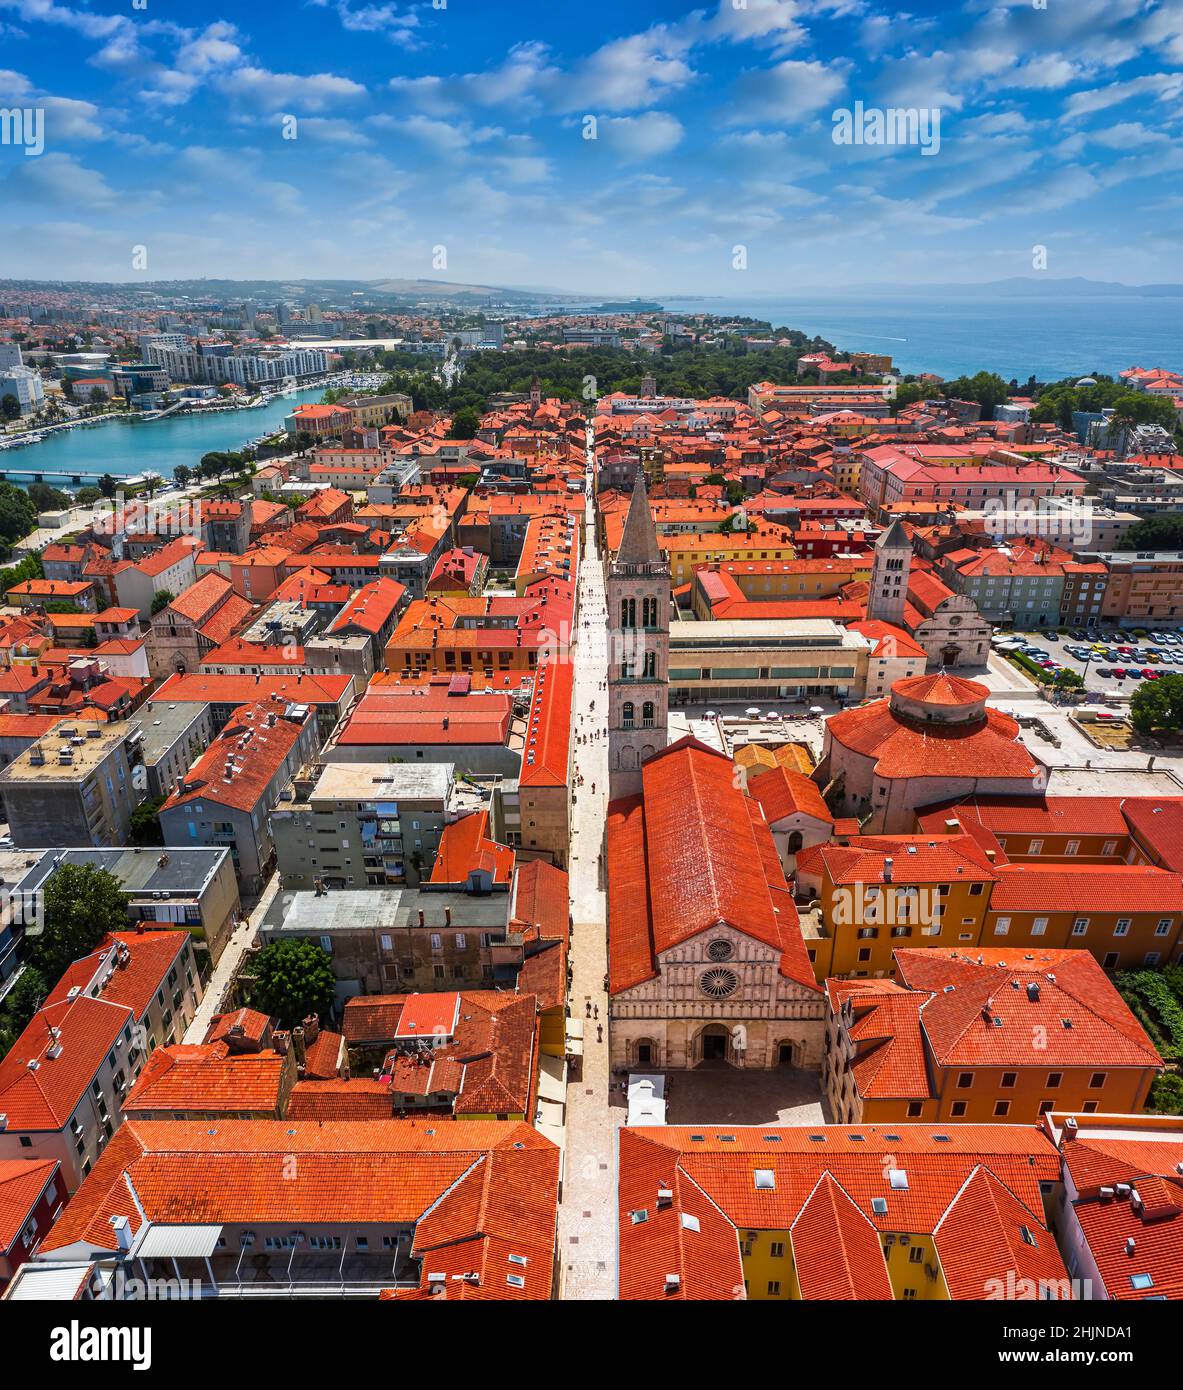 Zadar, Croatia - Aerial panoramic view of the Old Town of Zadar with Cathedral of St. Anastasia, Church of St. Donatus, St. Mary's Church, red rooftop Stock Photo